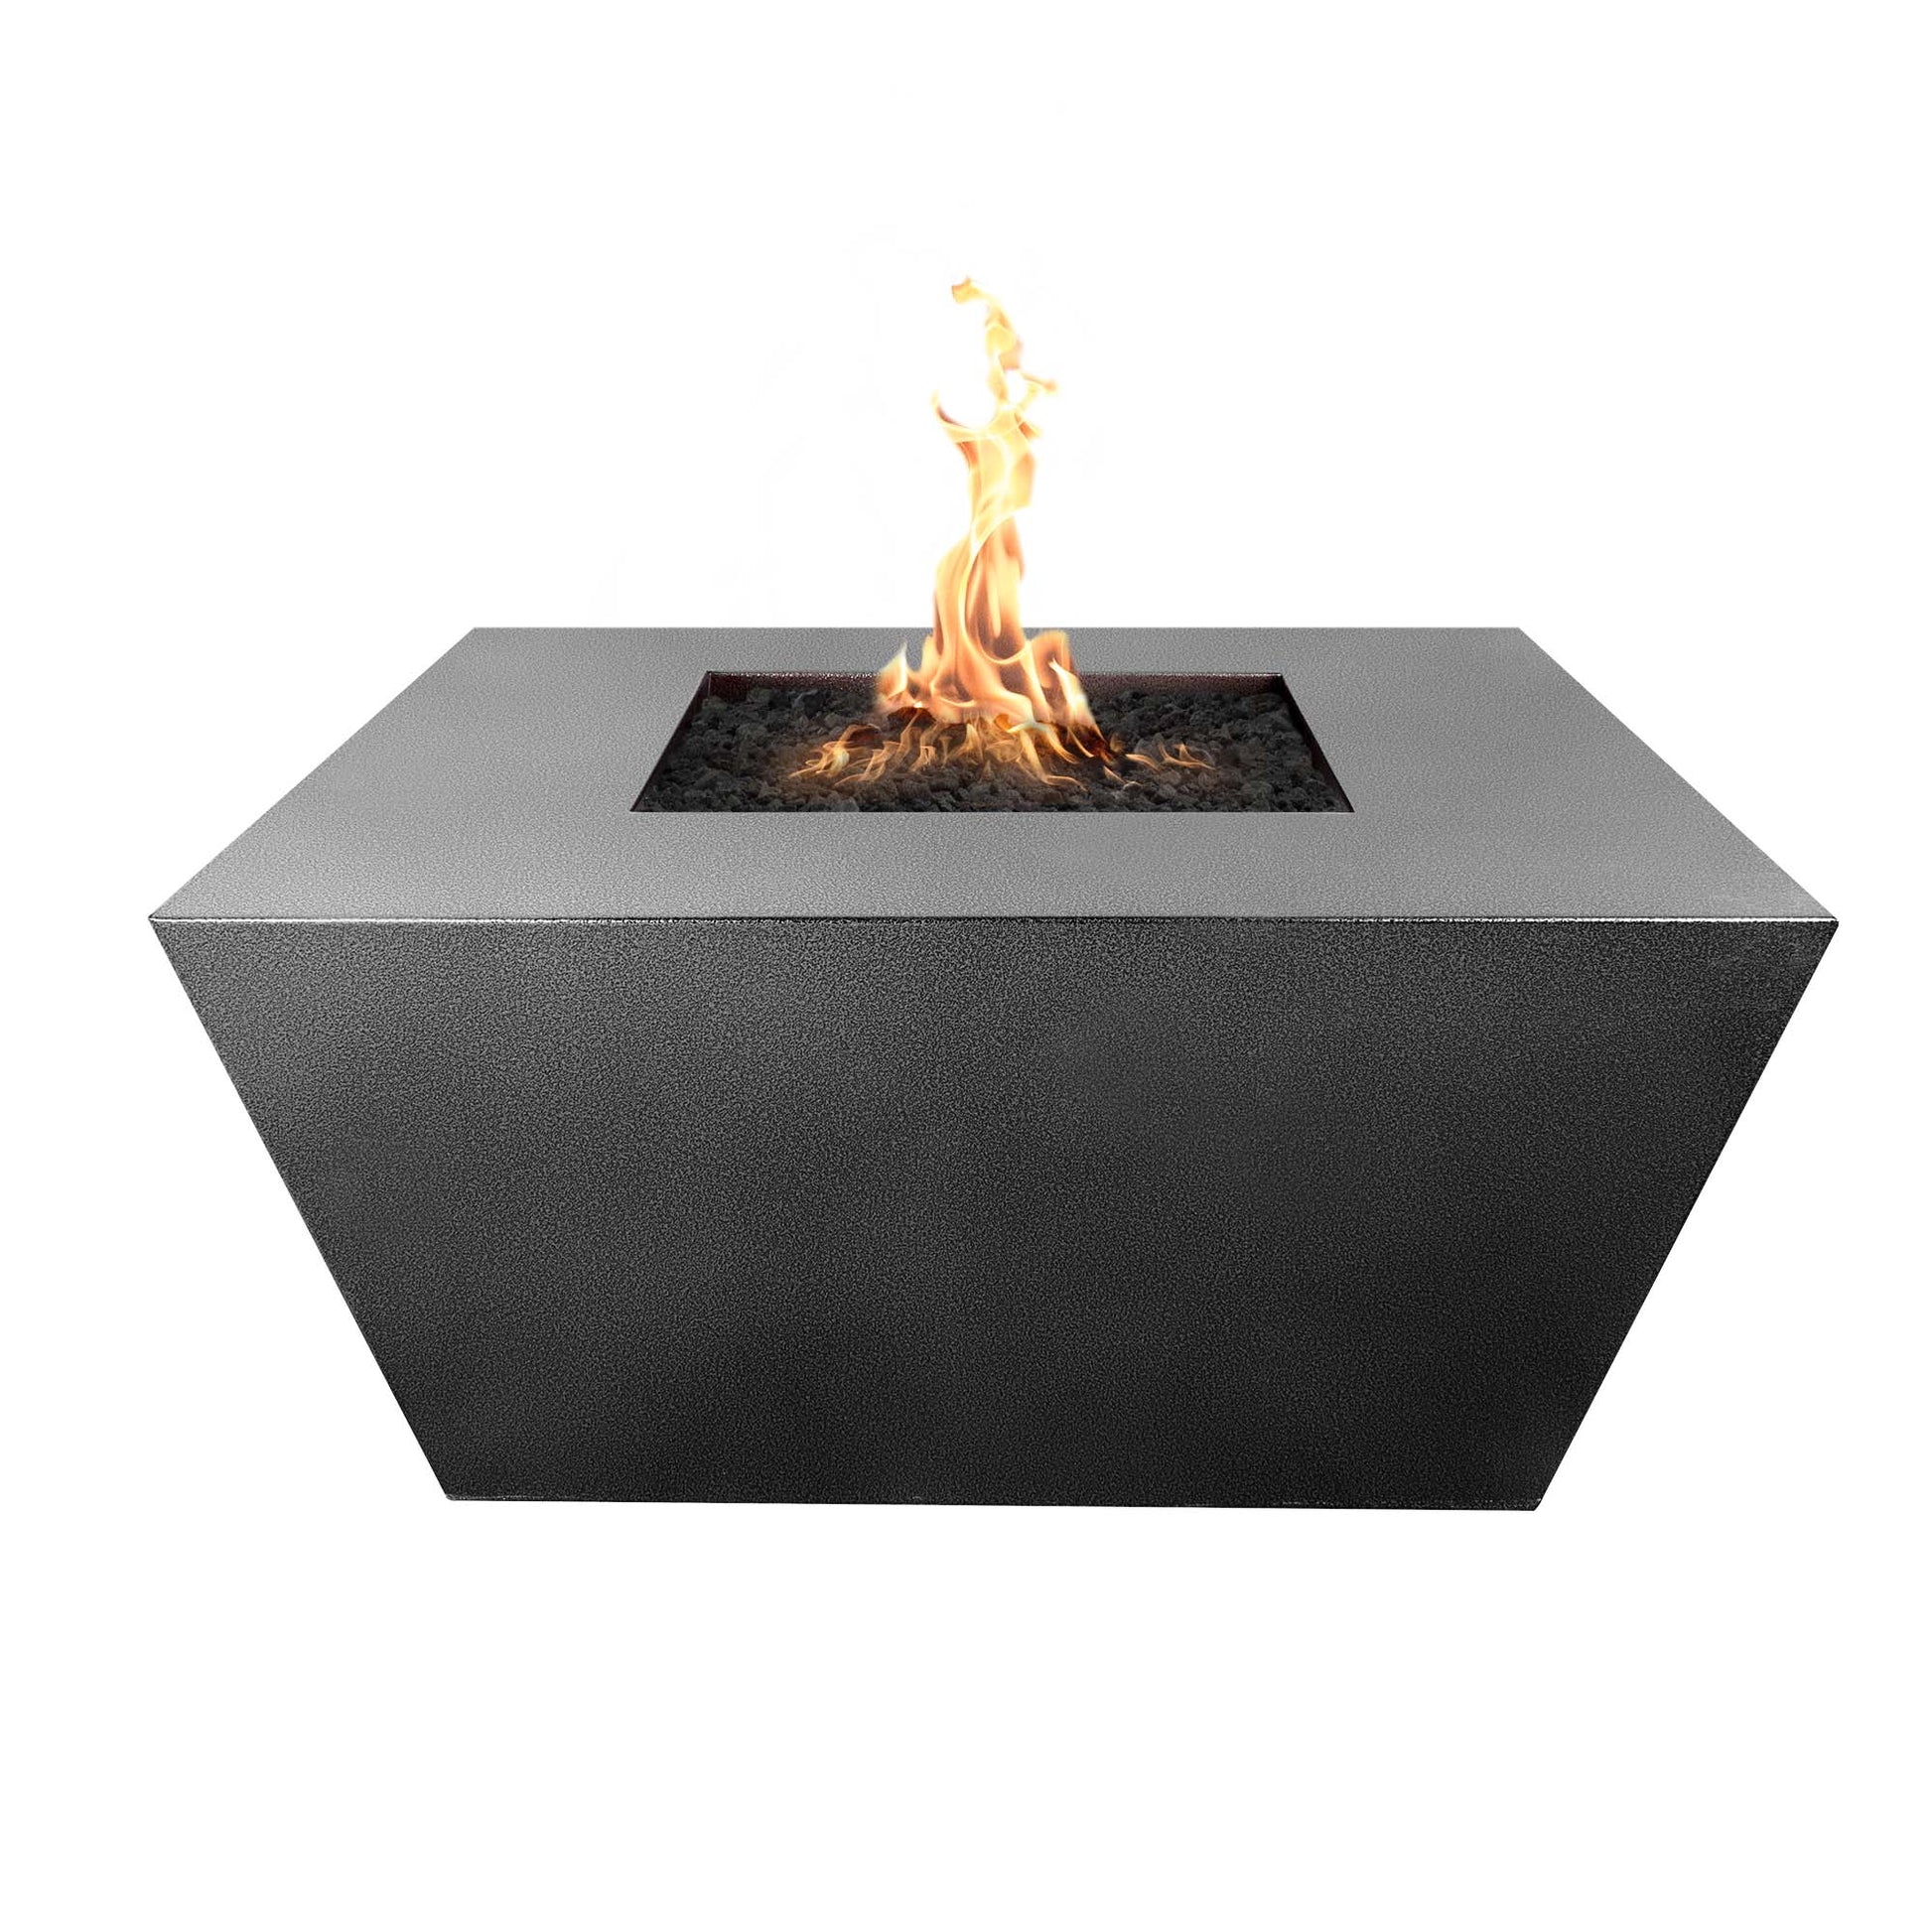 The Outdoor Plus Square Redan 36" Corten Steel Natural Gas Fire Pit with 110V Electronic Ignition